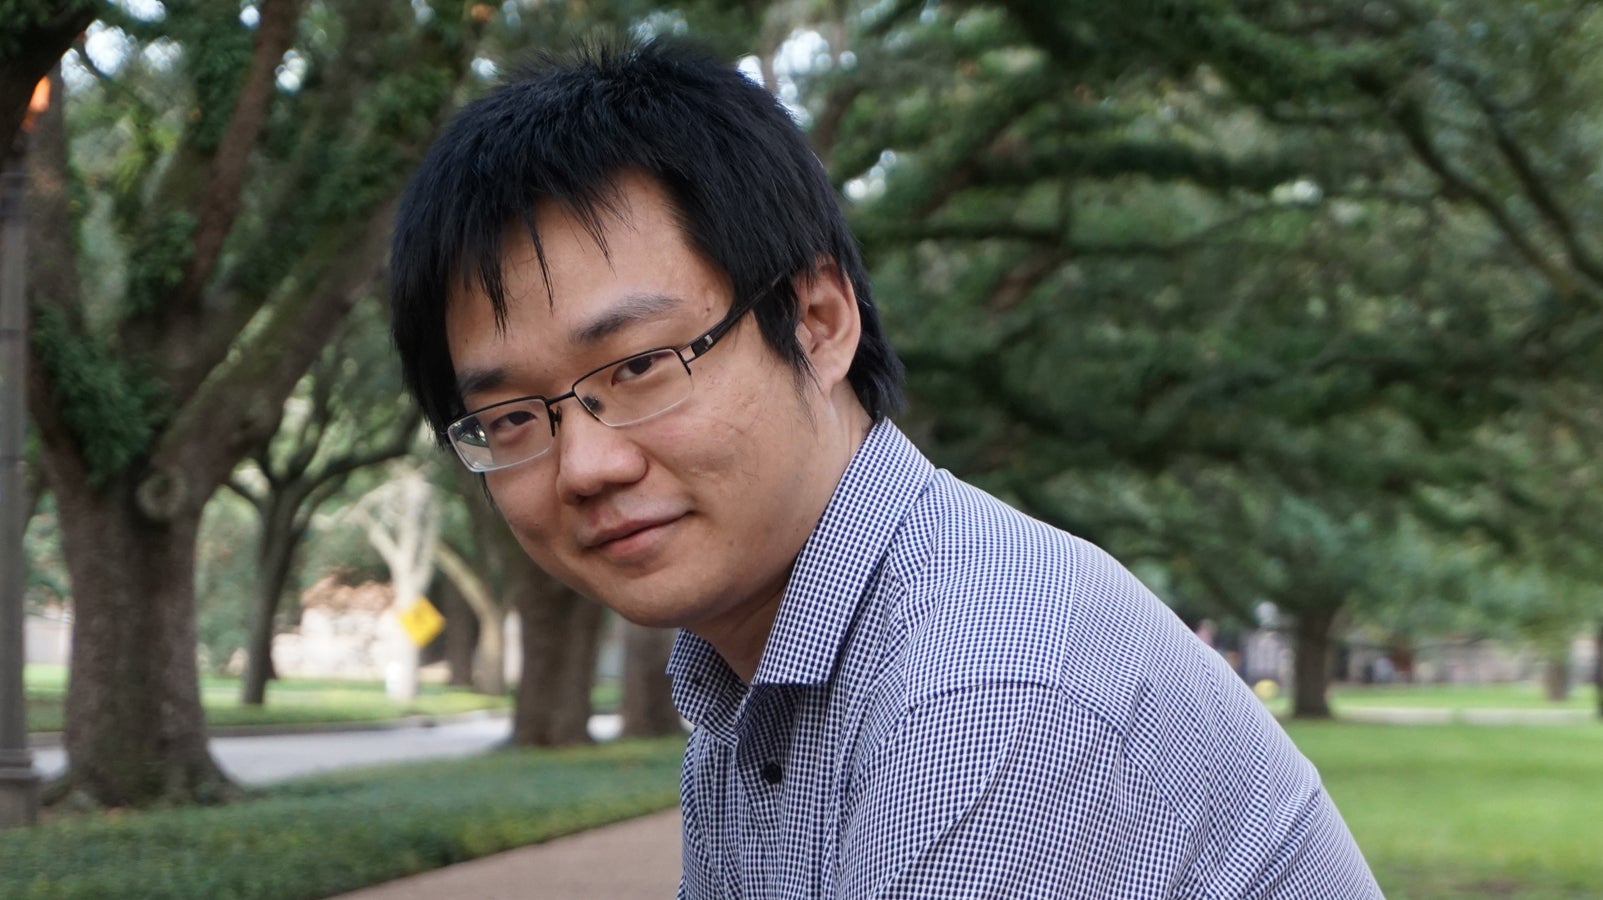 Rice CS Ph.D. candidate Chen Dun matriculated in 2019.